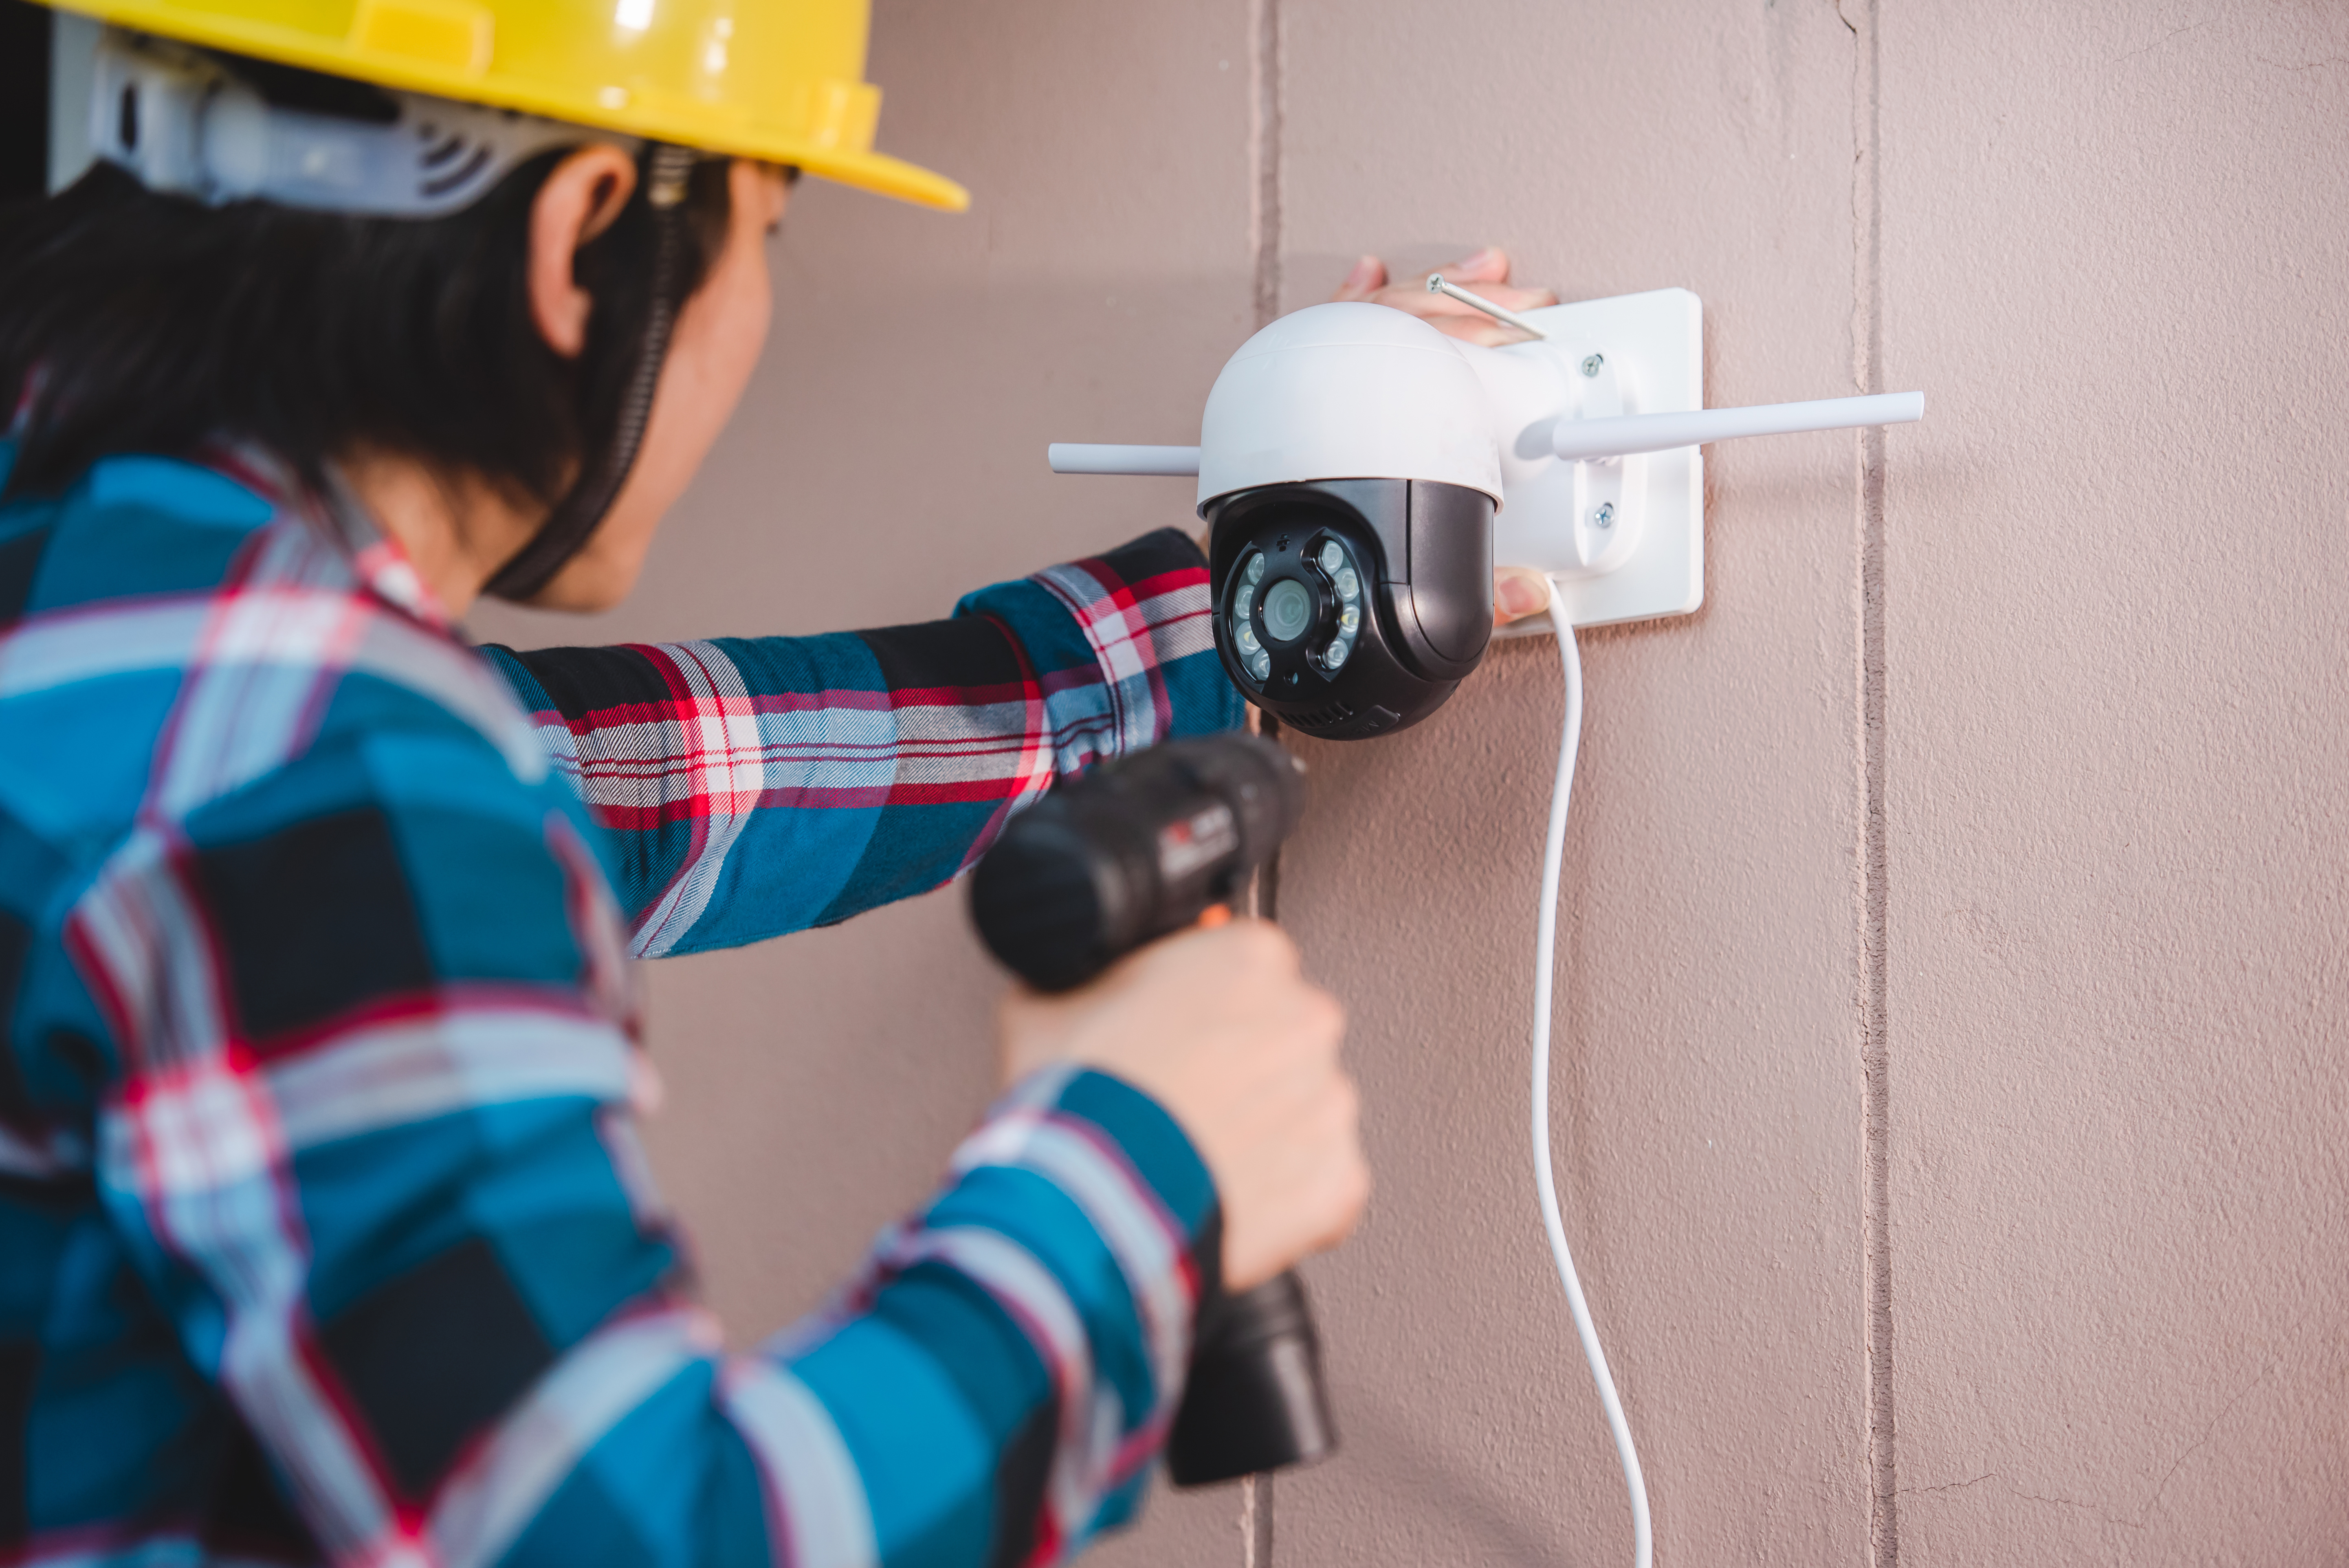 How much does it cost to install cameras in your house?